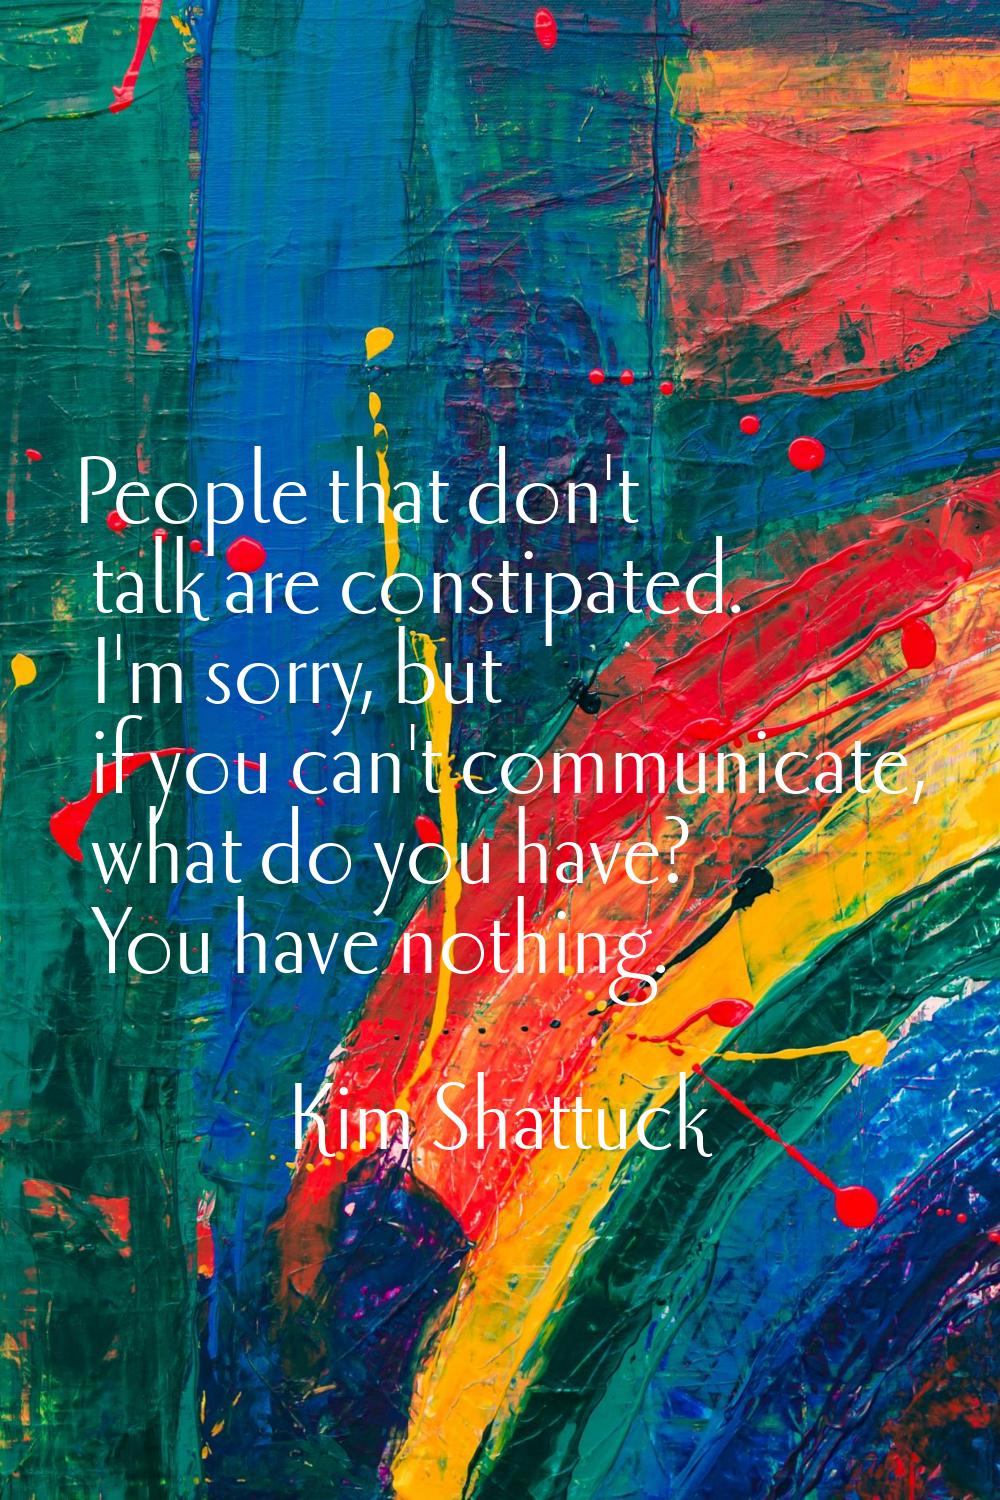 People that don't talk are constipated. I'm sorry, but if you can't communicate, what do you have? 